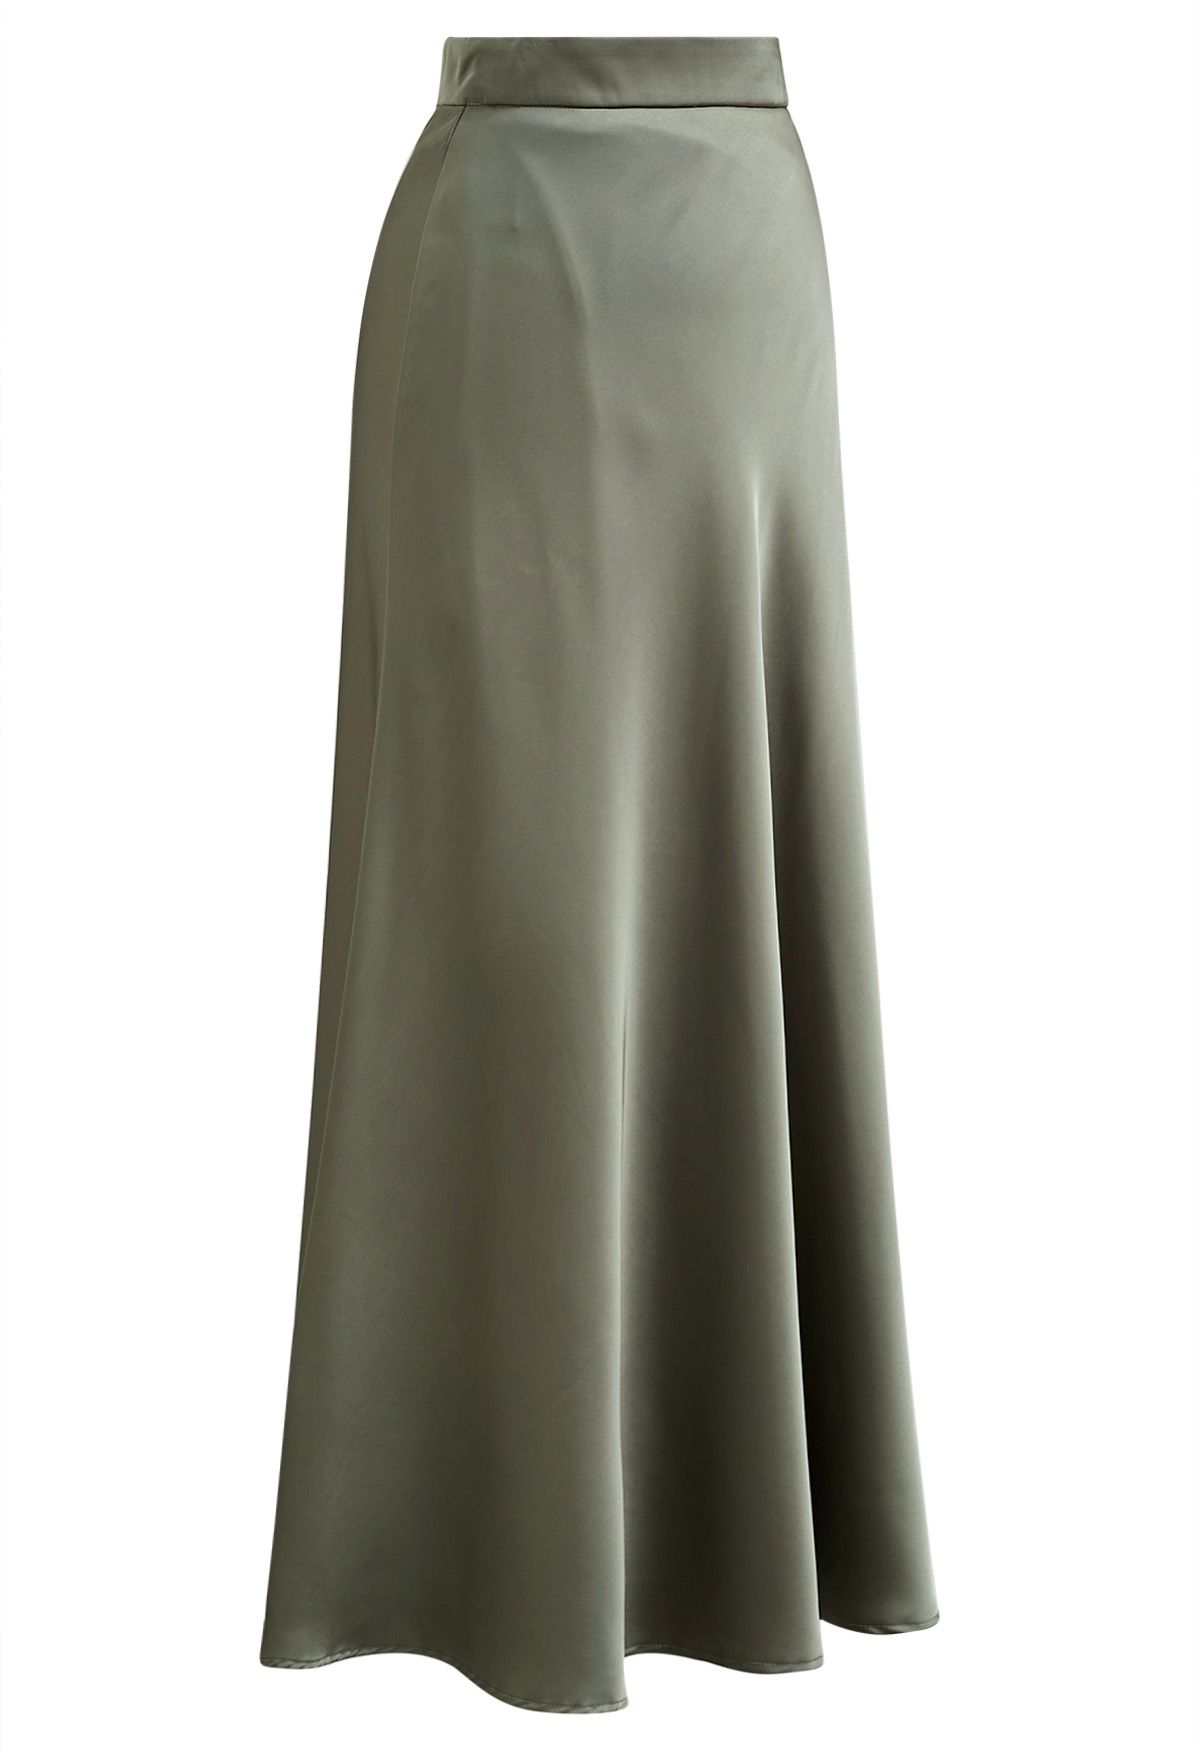 Understated Elegance Satin Maxi Skirt in Olive - Retro, Indie and ...